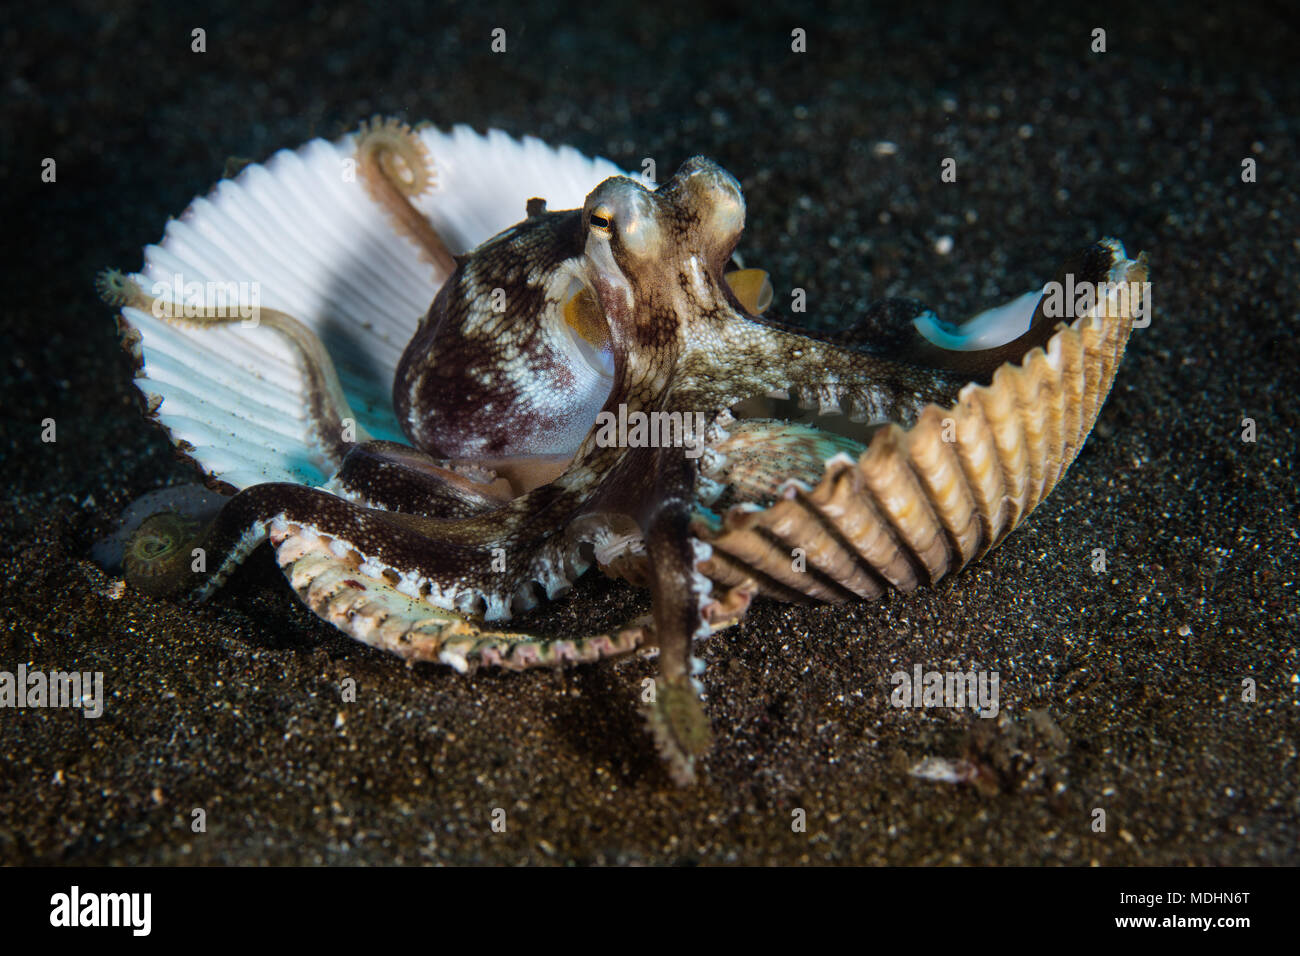 A Coconut octopus clings with its agile tentacles to empty shells on the seafloor in Lembeh Strait, Indonesia. Stock Photo